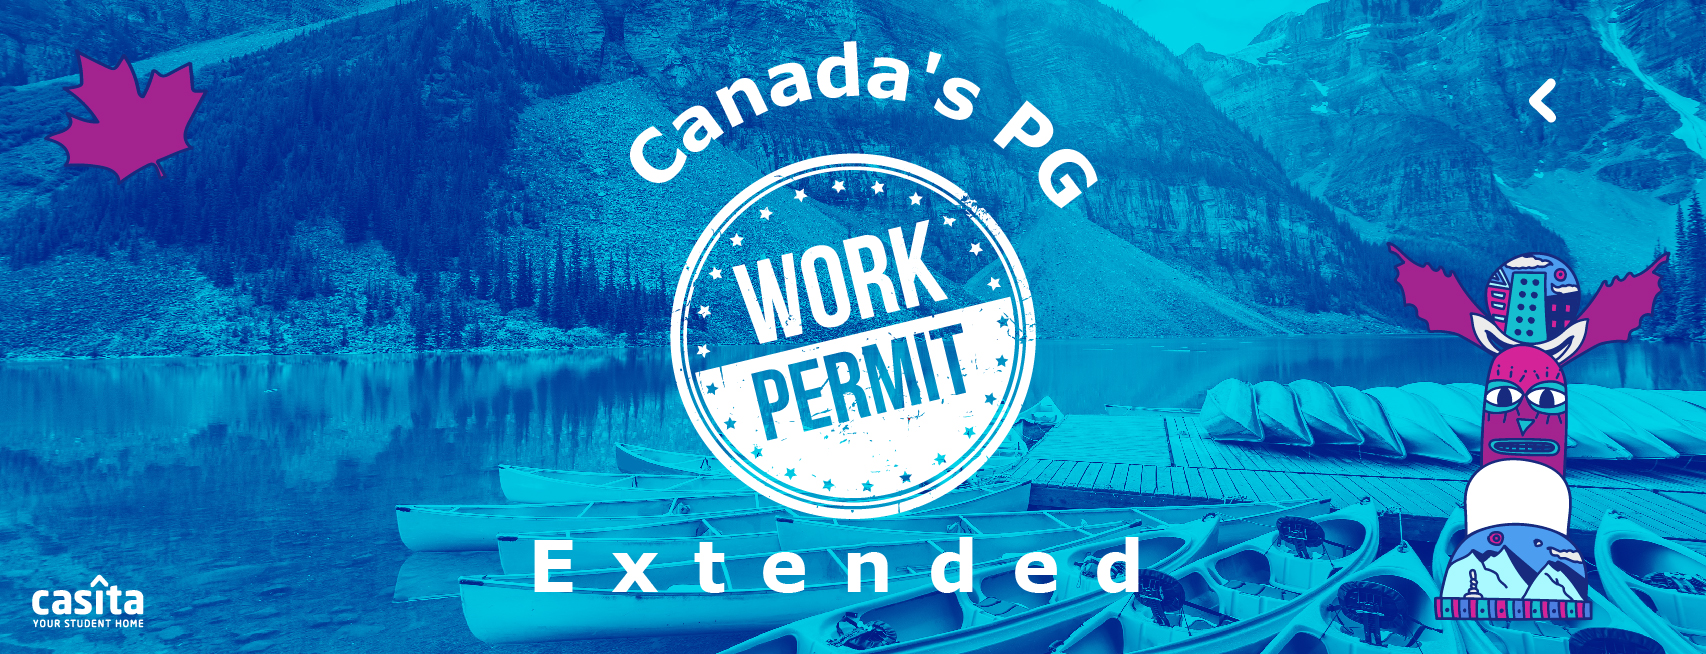 Canada's PG Work Permit Extended